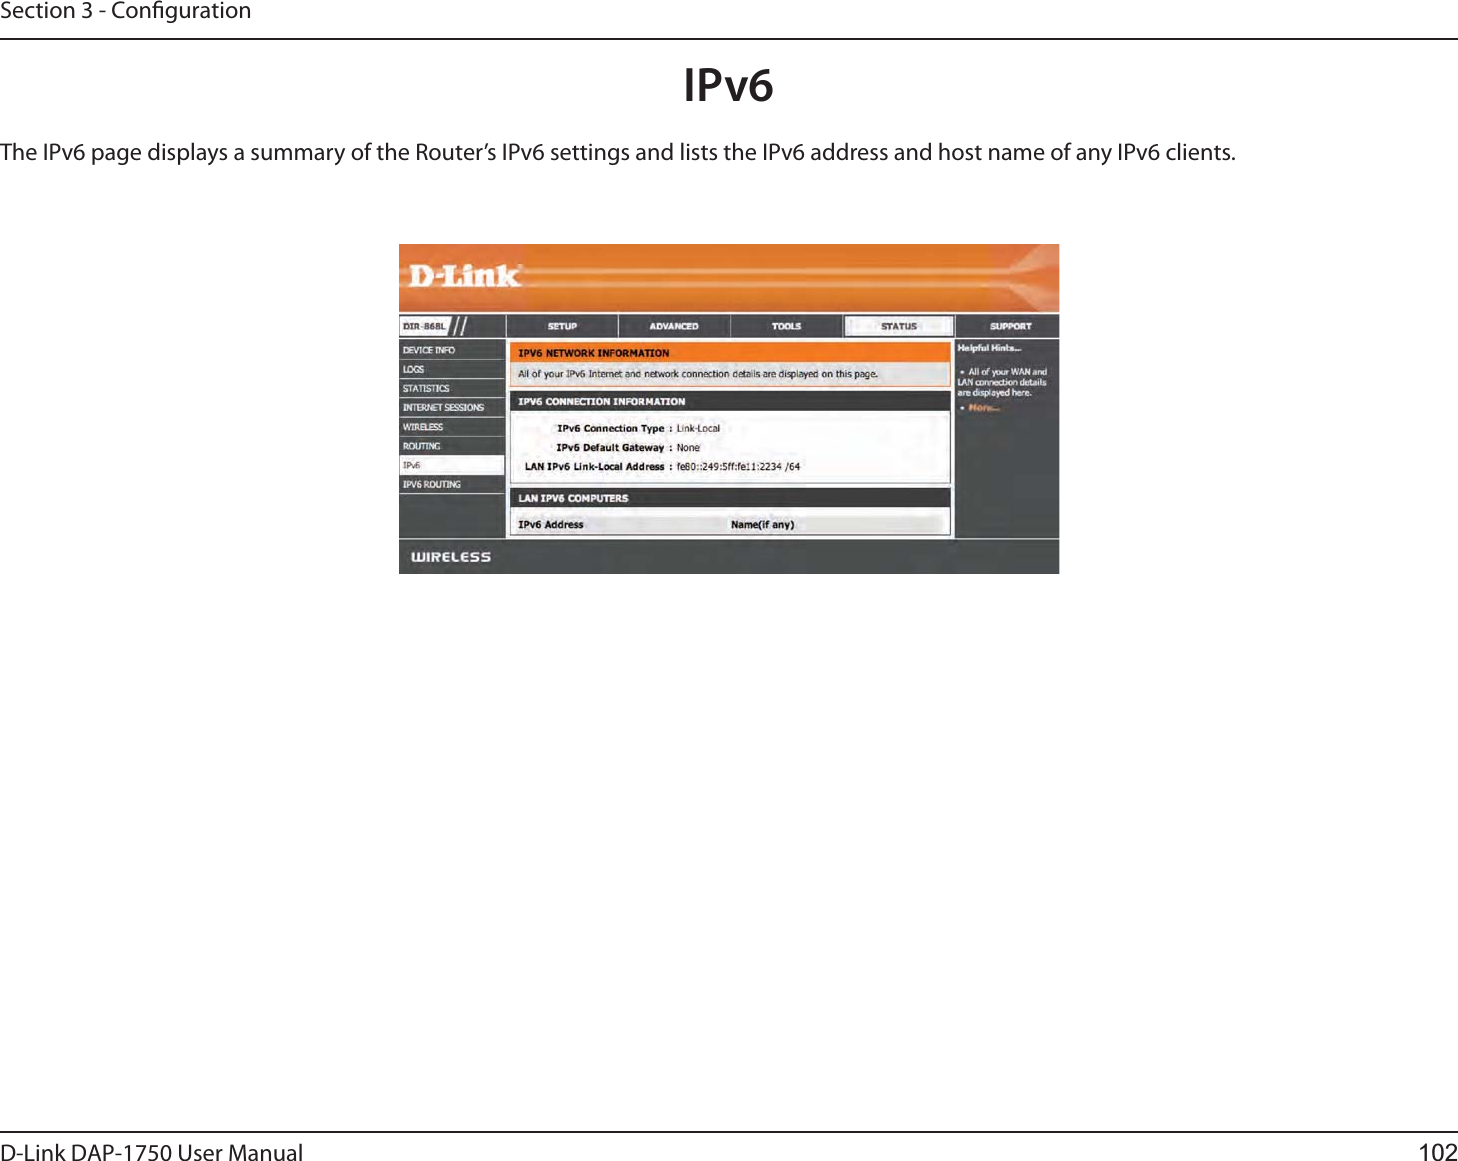 D-Link %&quot;1 User ManualSection 3 - CongurationIPv6The IPv6 page displays a summary of the Router’s IPv6 settings and lists the IPv6 address and host name of any IPv6 clients. 102